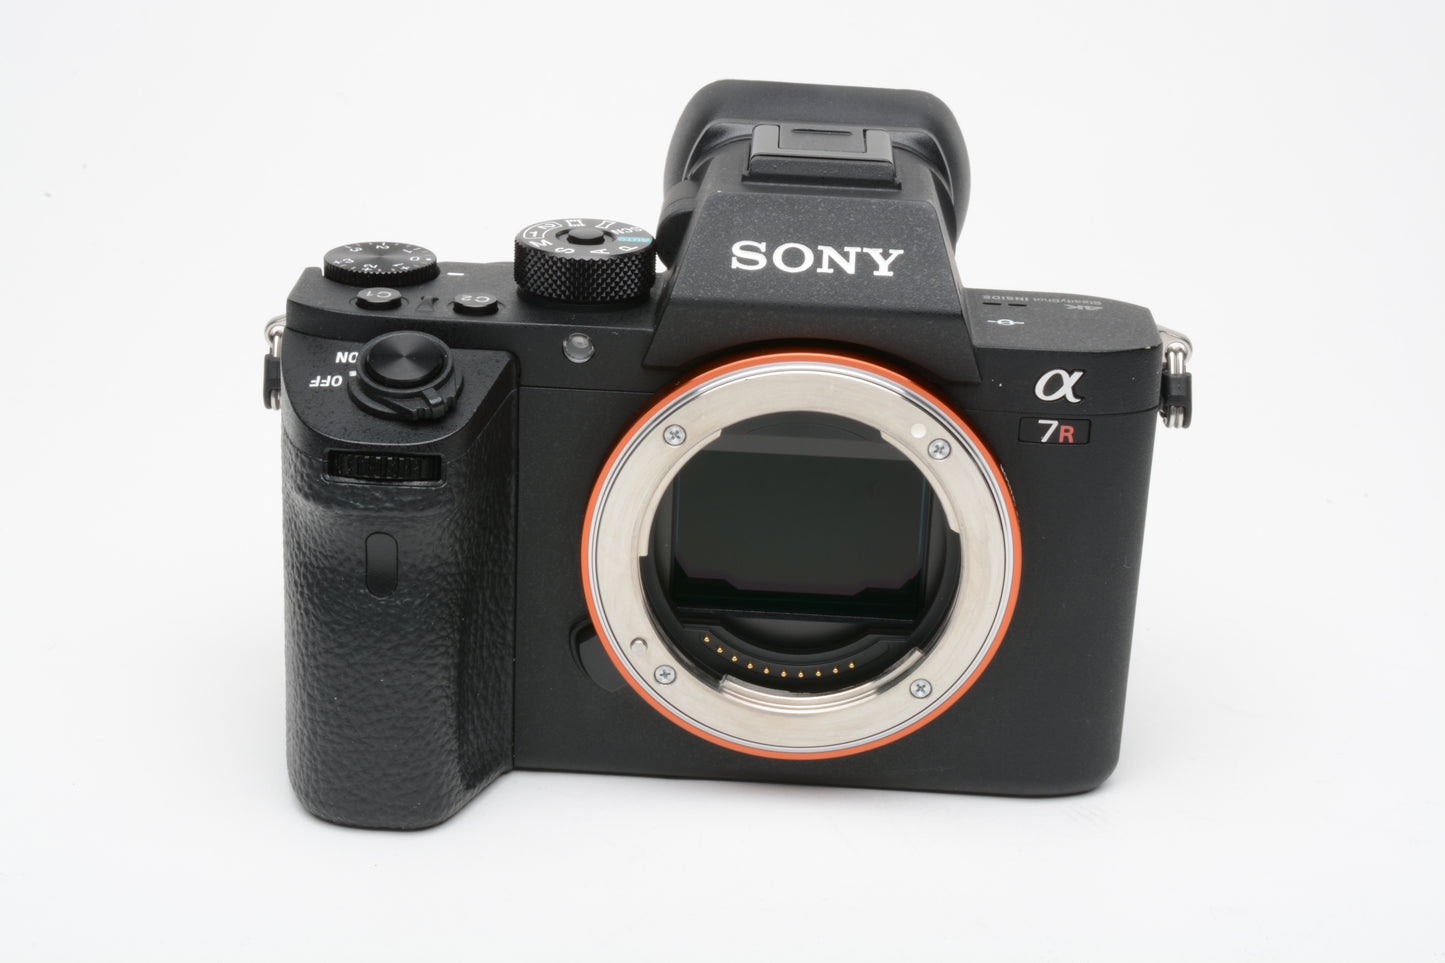 Sony A7R II Mirrorless Body, Grip, 2batts, USB charger, Only 1919 Acts!